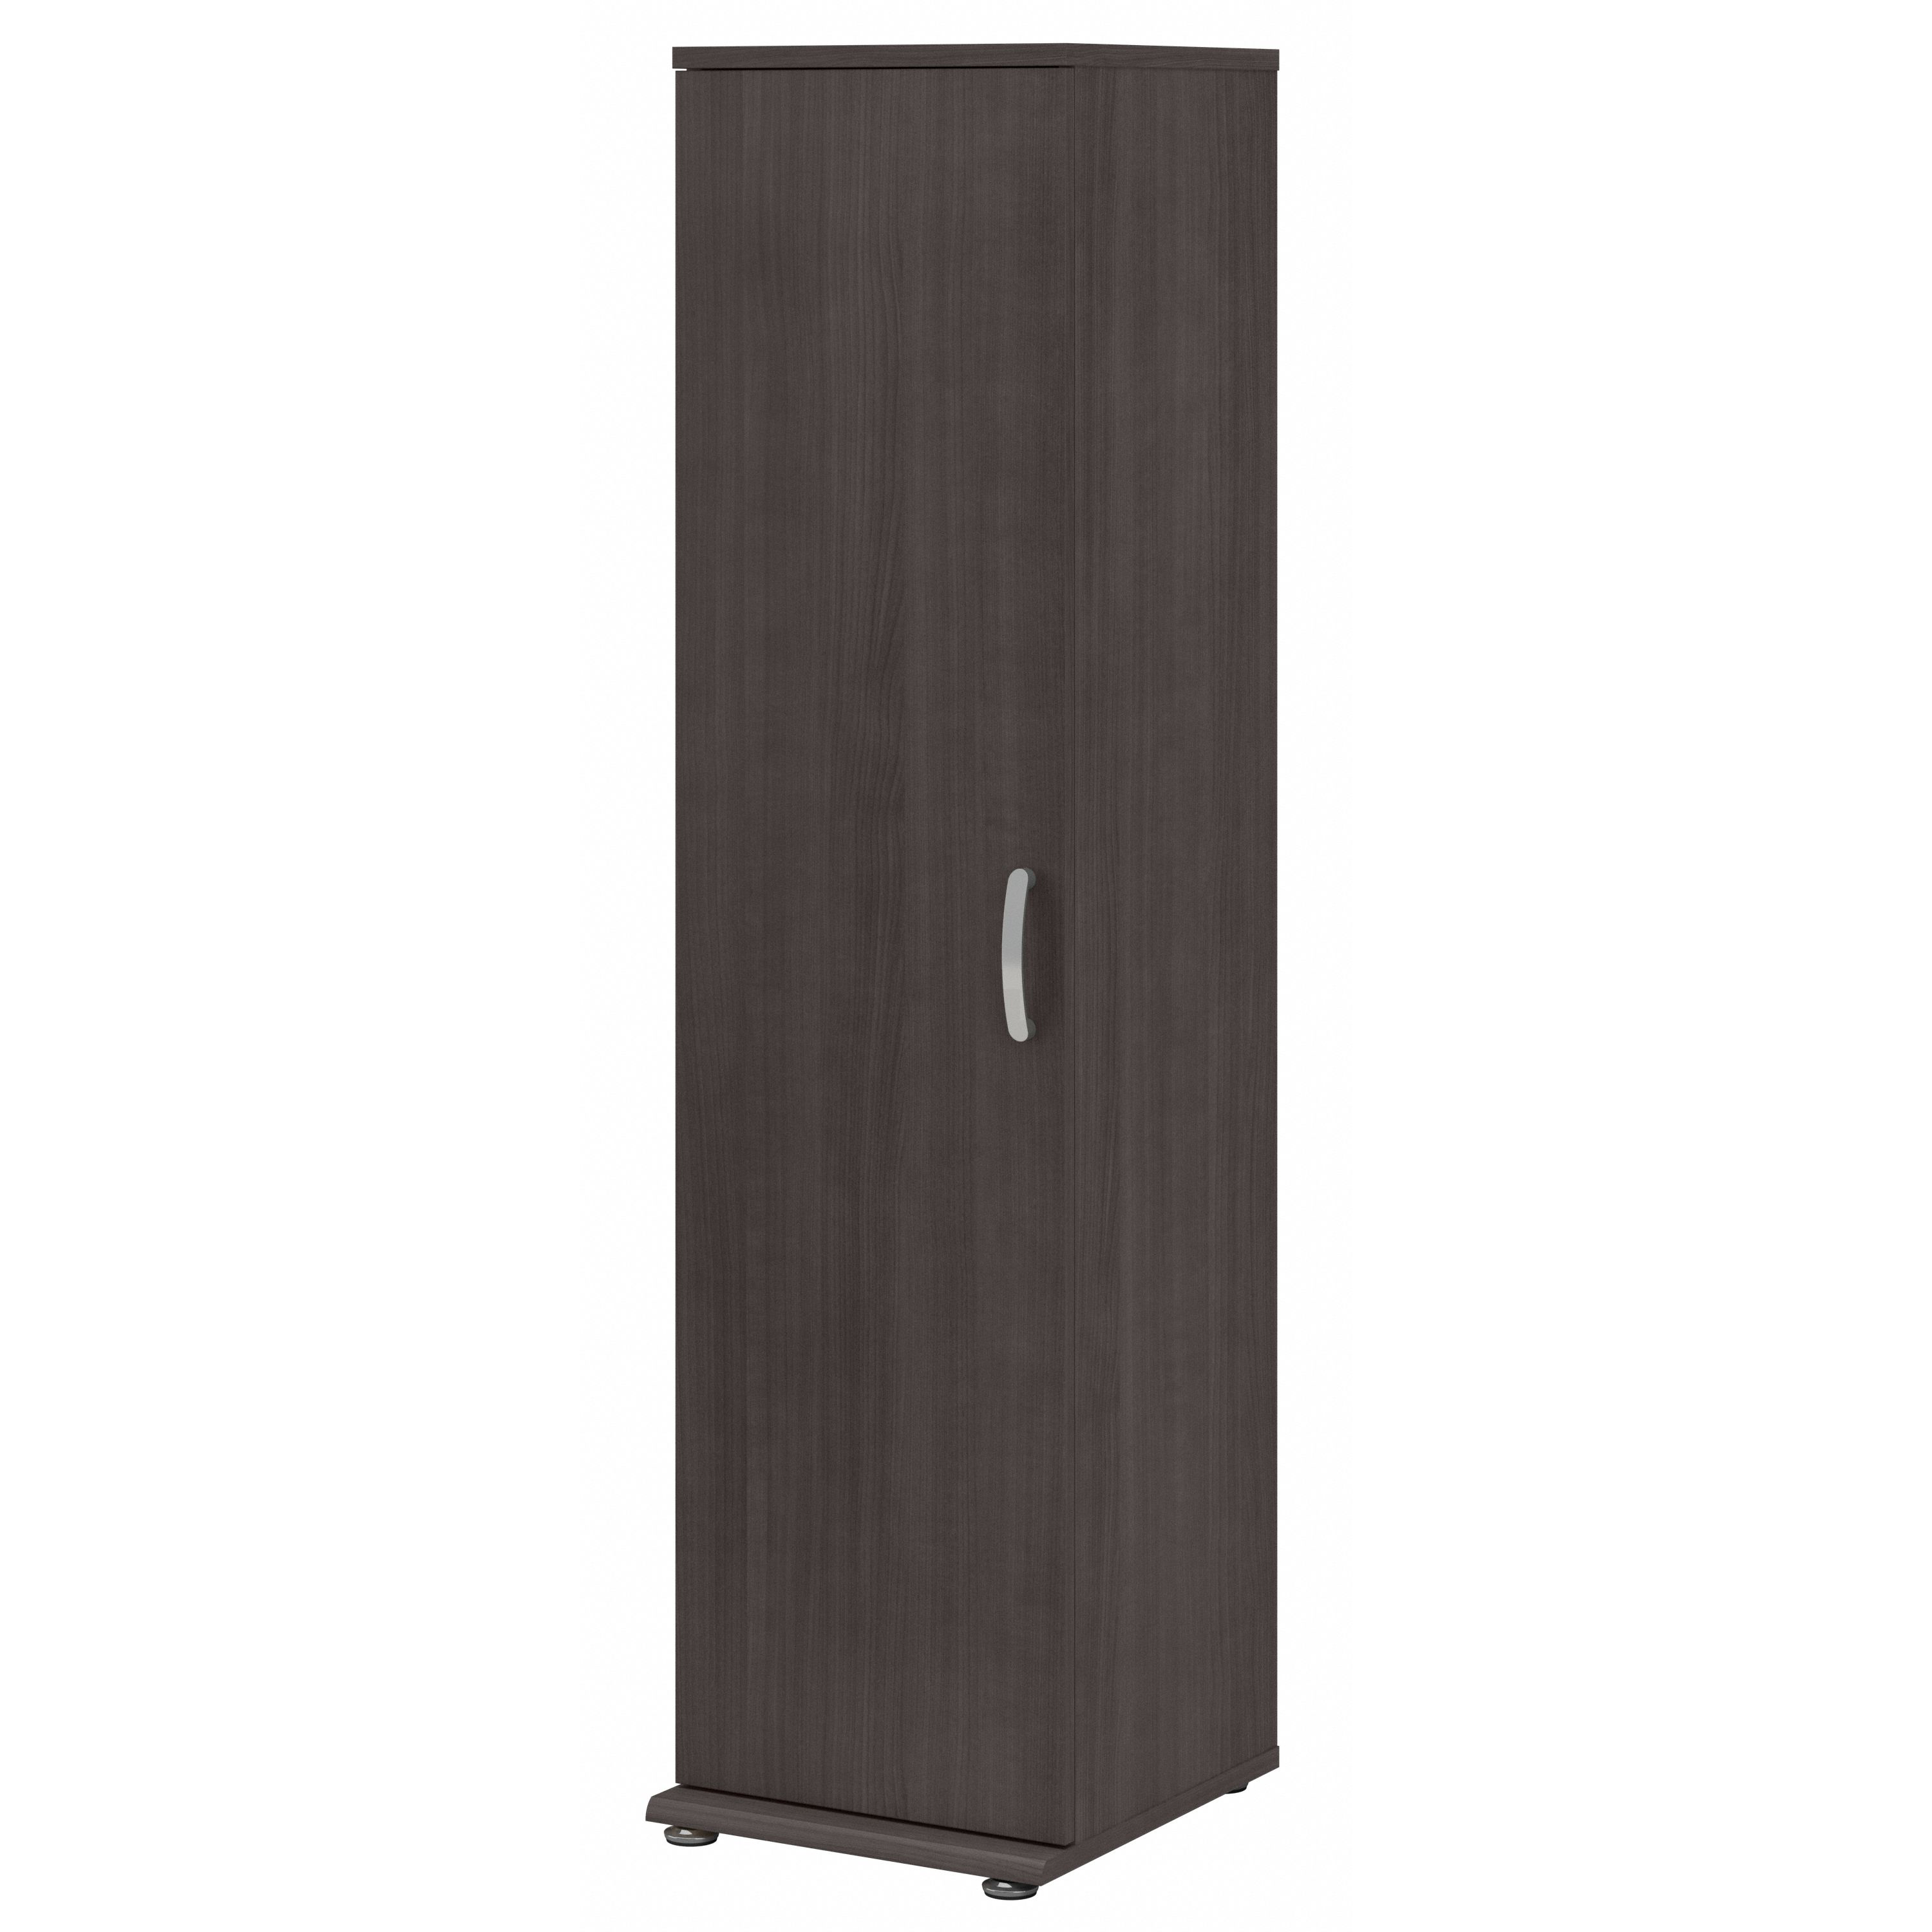 Shop Bush Business Furniture Universal Narrow Garage Storage Cabinet with Door and Shelves 02 GAS116SG-Z #color_storm gray